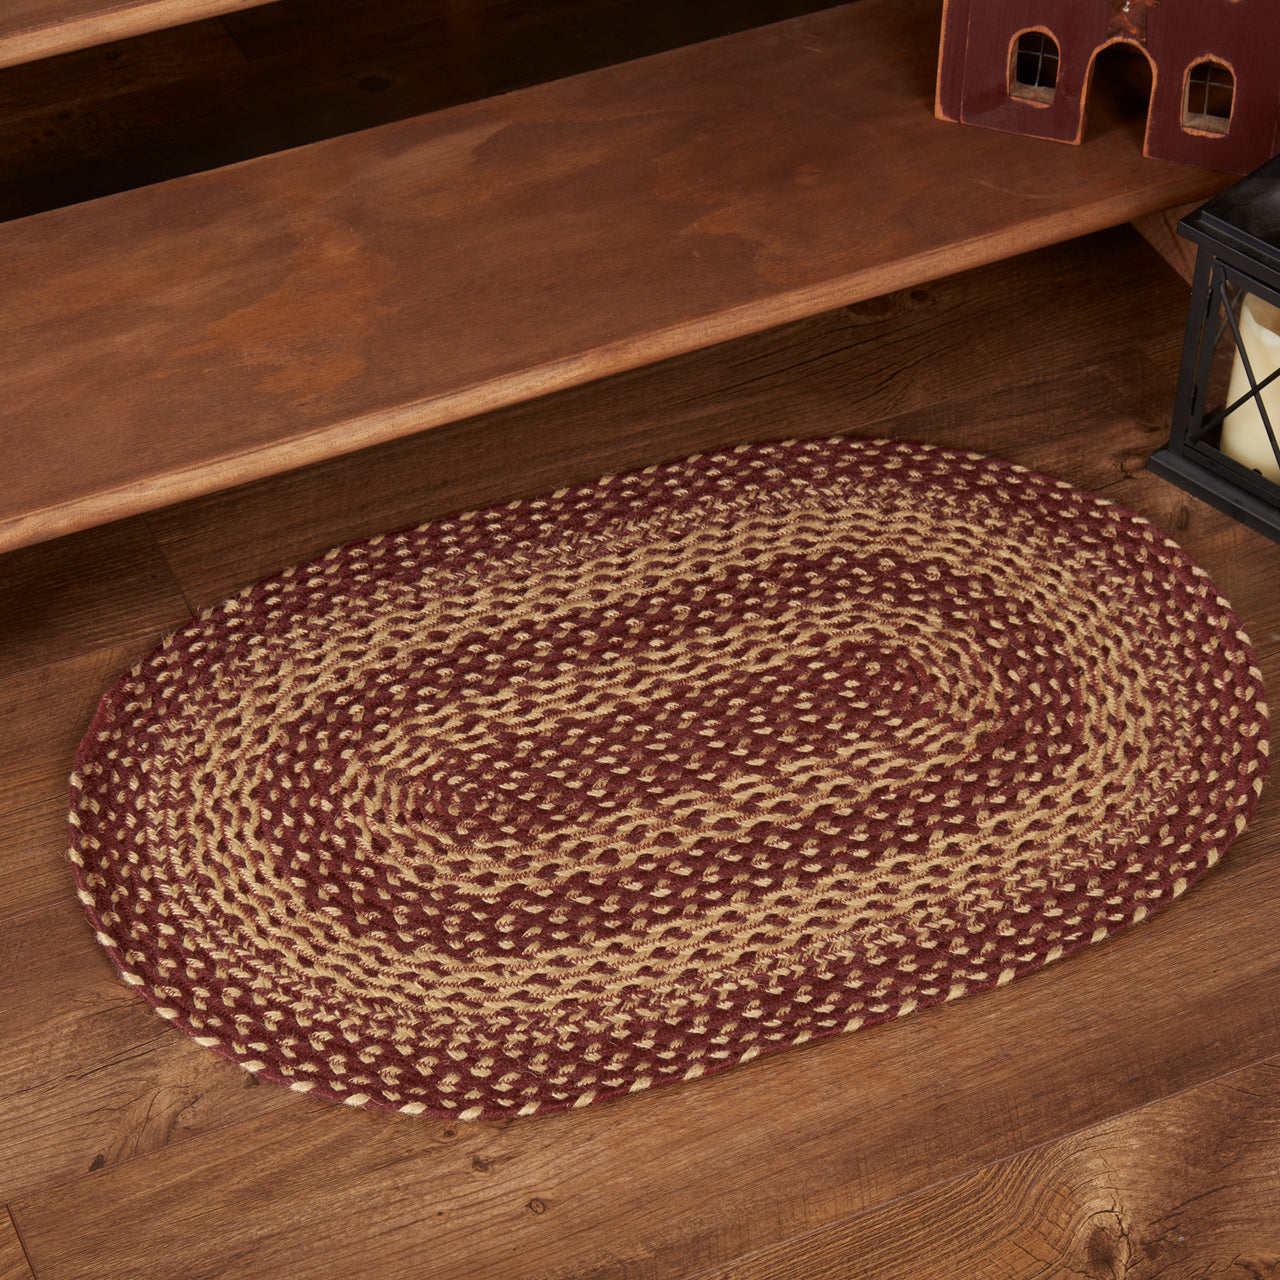 Burgundy Tan Jute Braided Rug Oval 20"x30" with Rug Pad VHC Brands